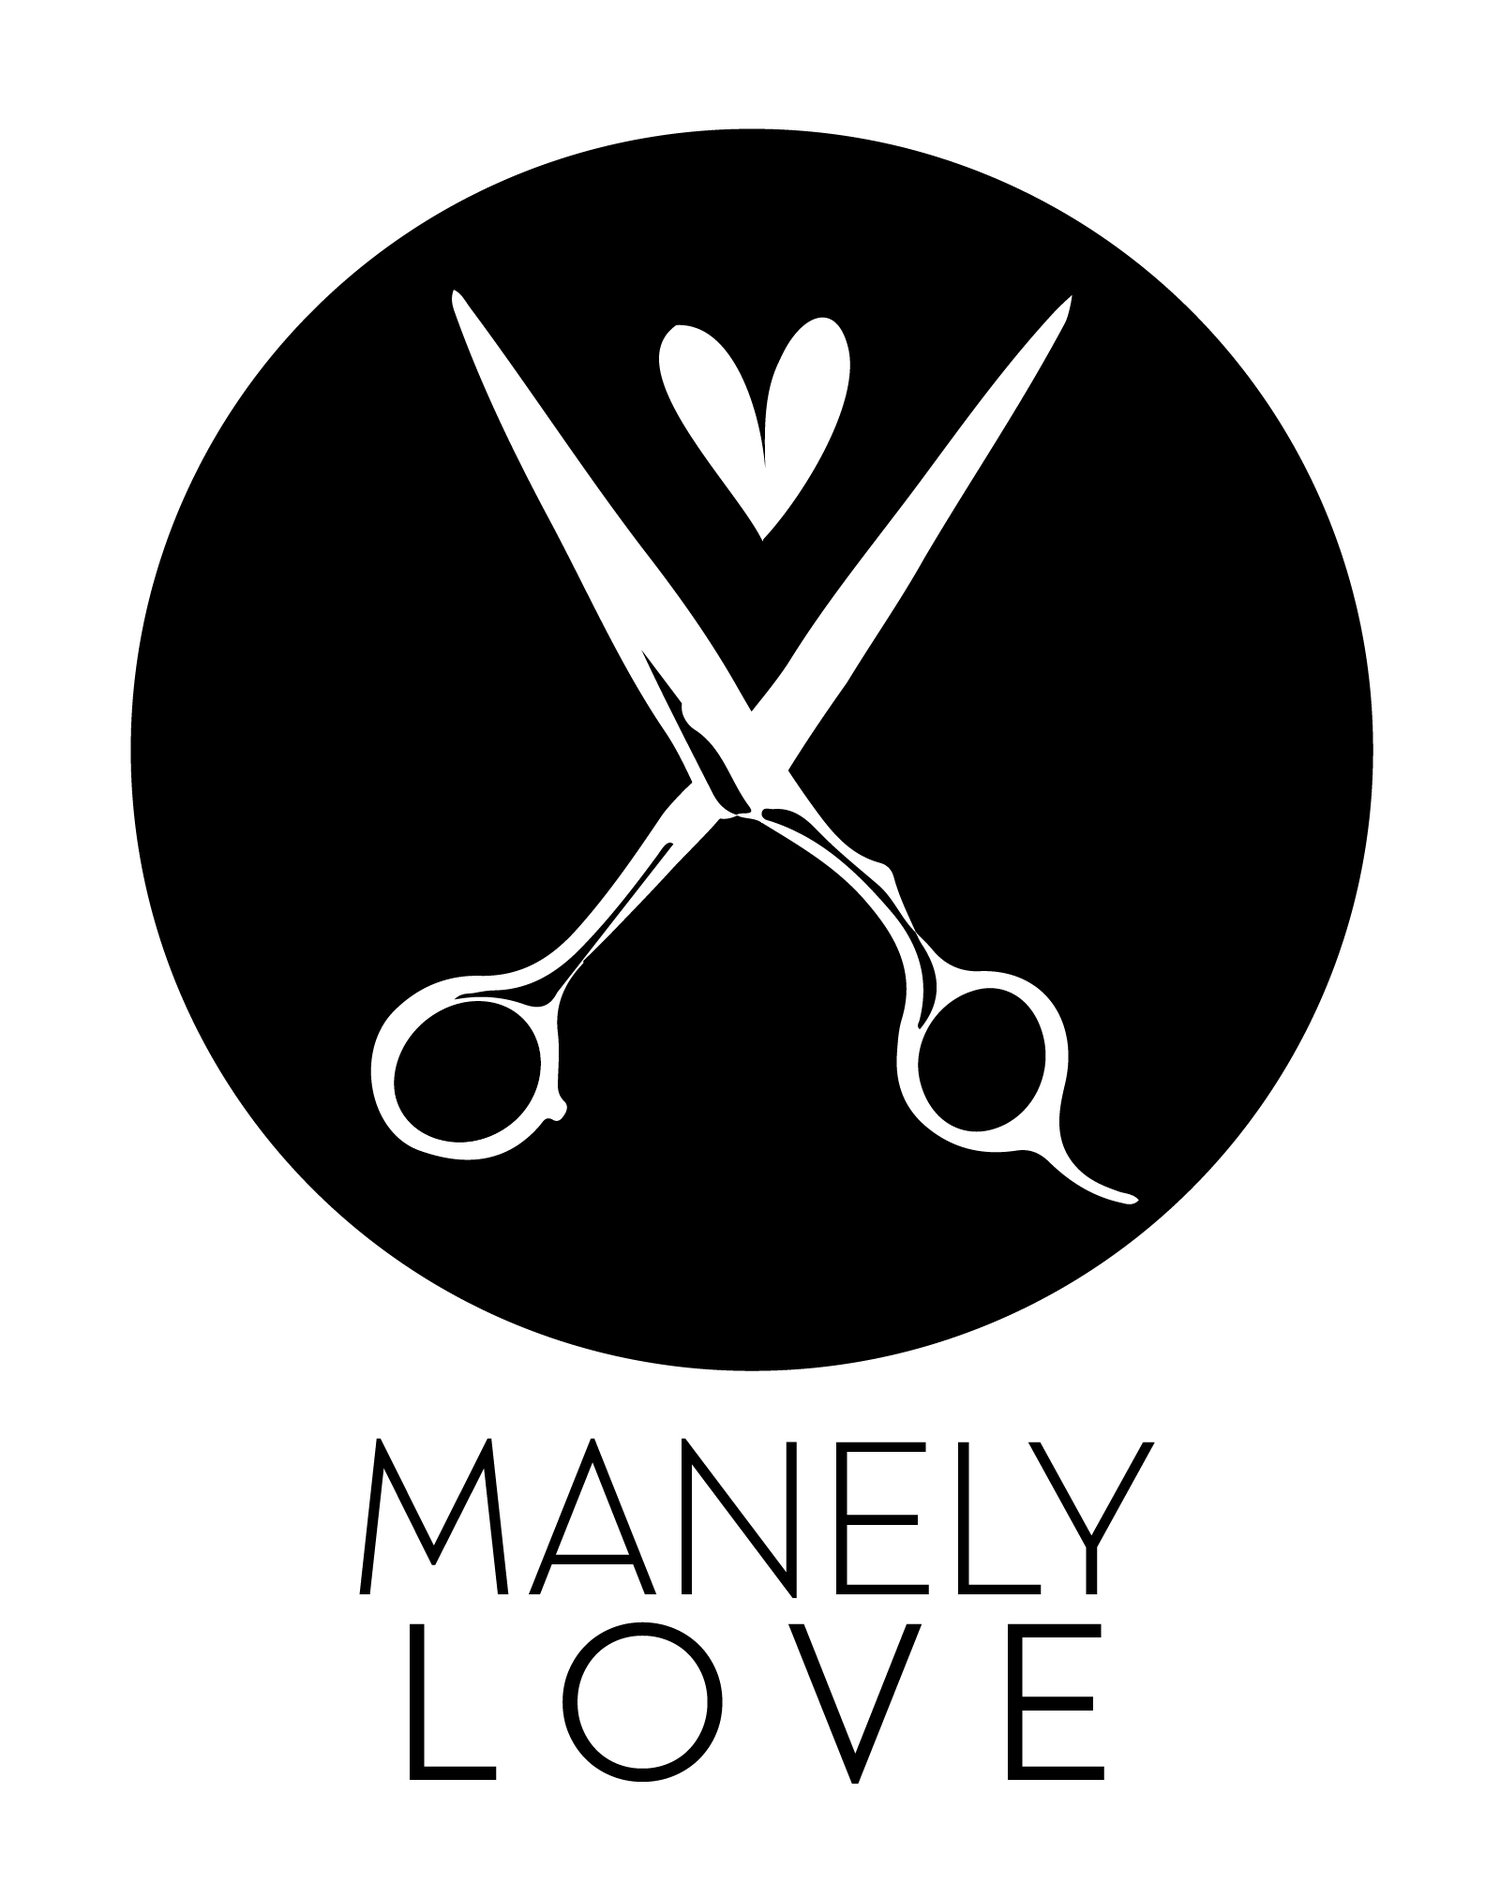 Manely Love by Sarah D. 